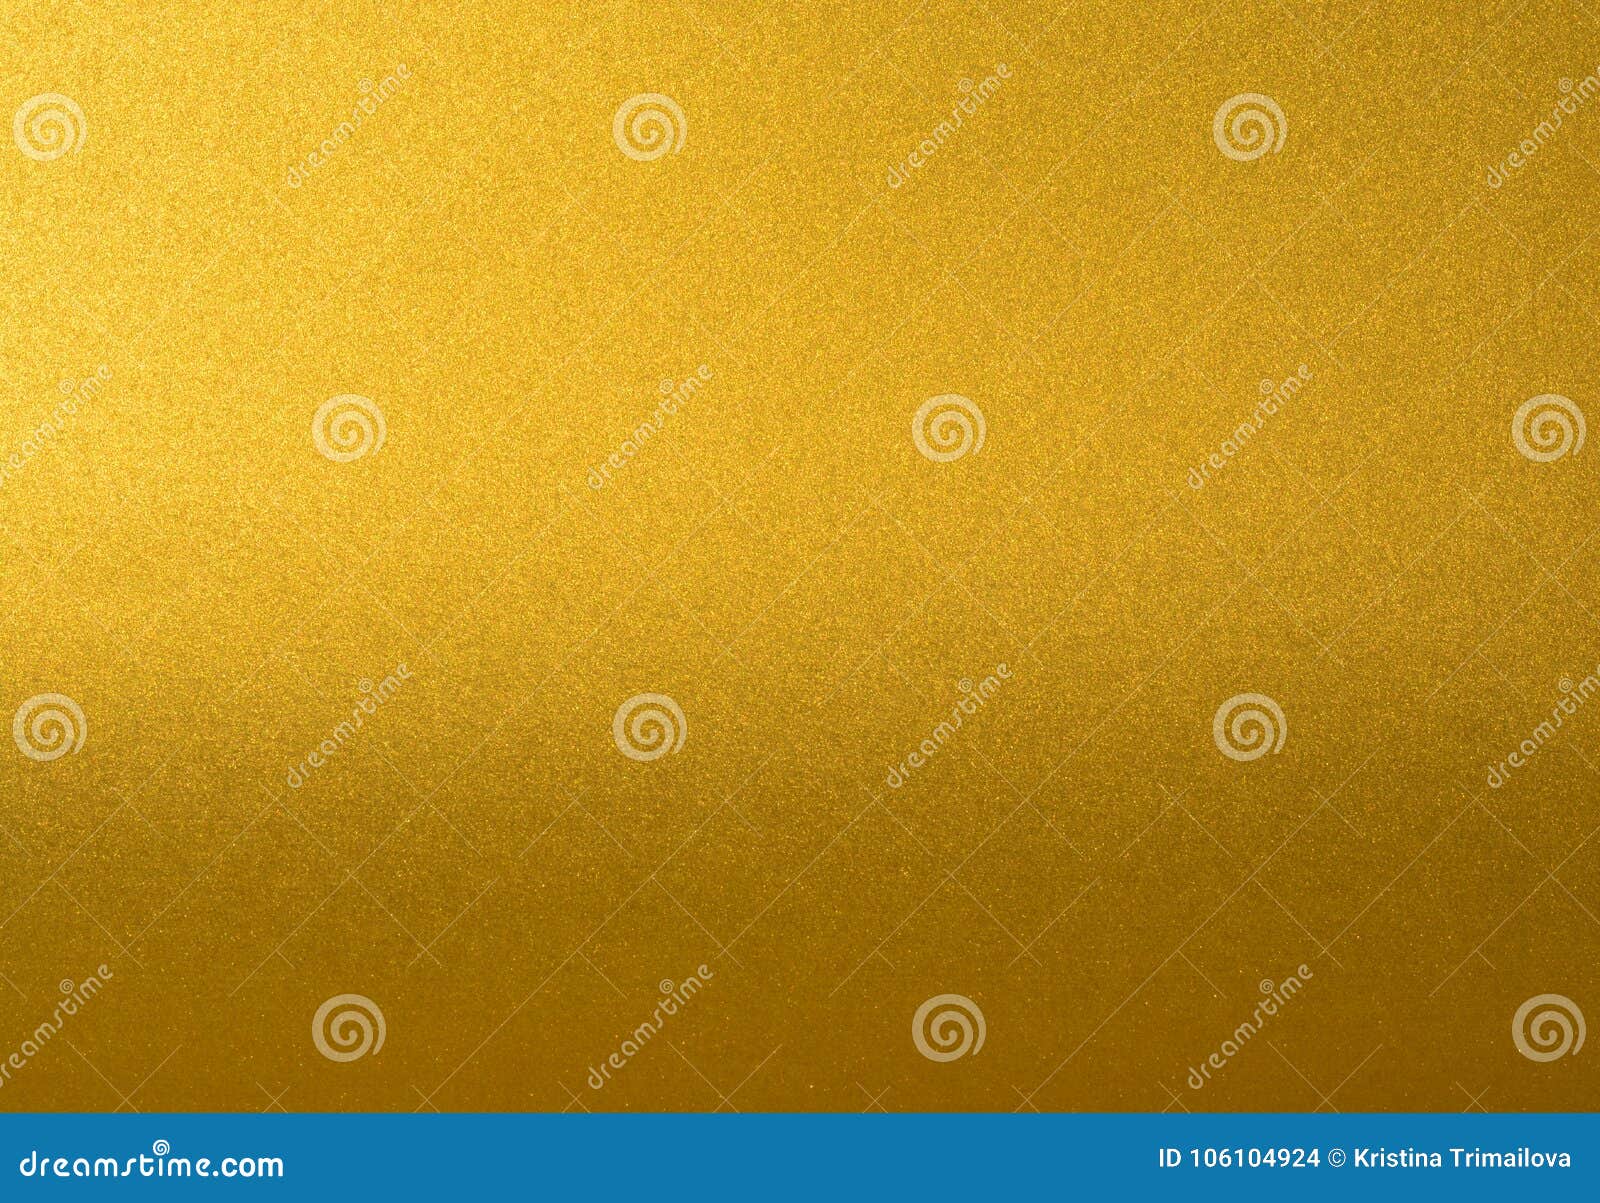 Details of golden texture background with gradient and shadow